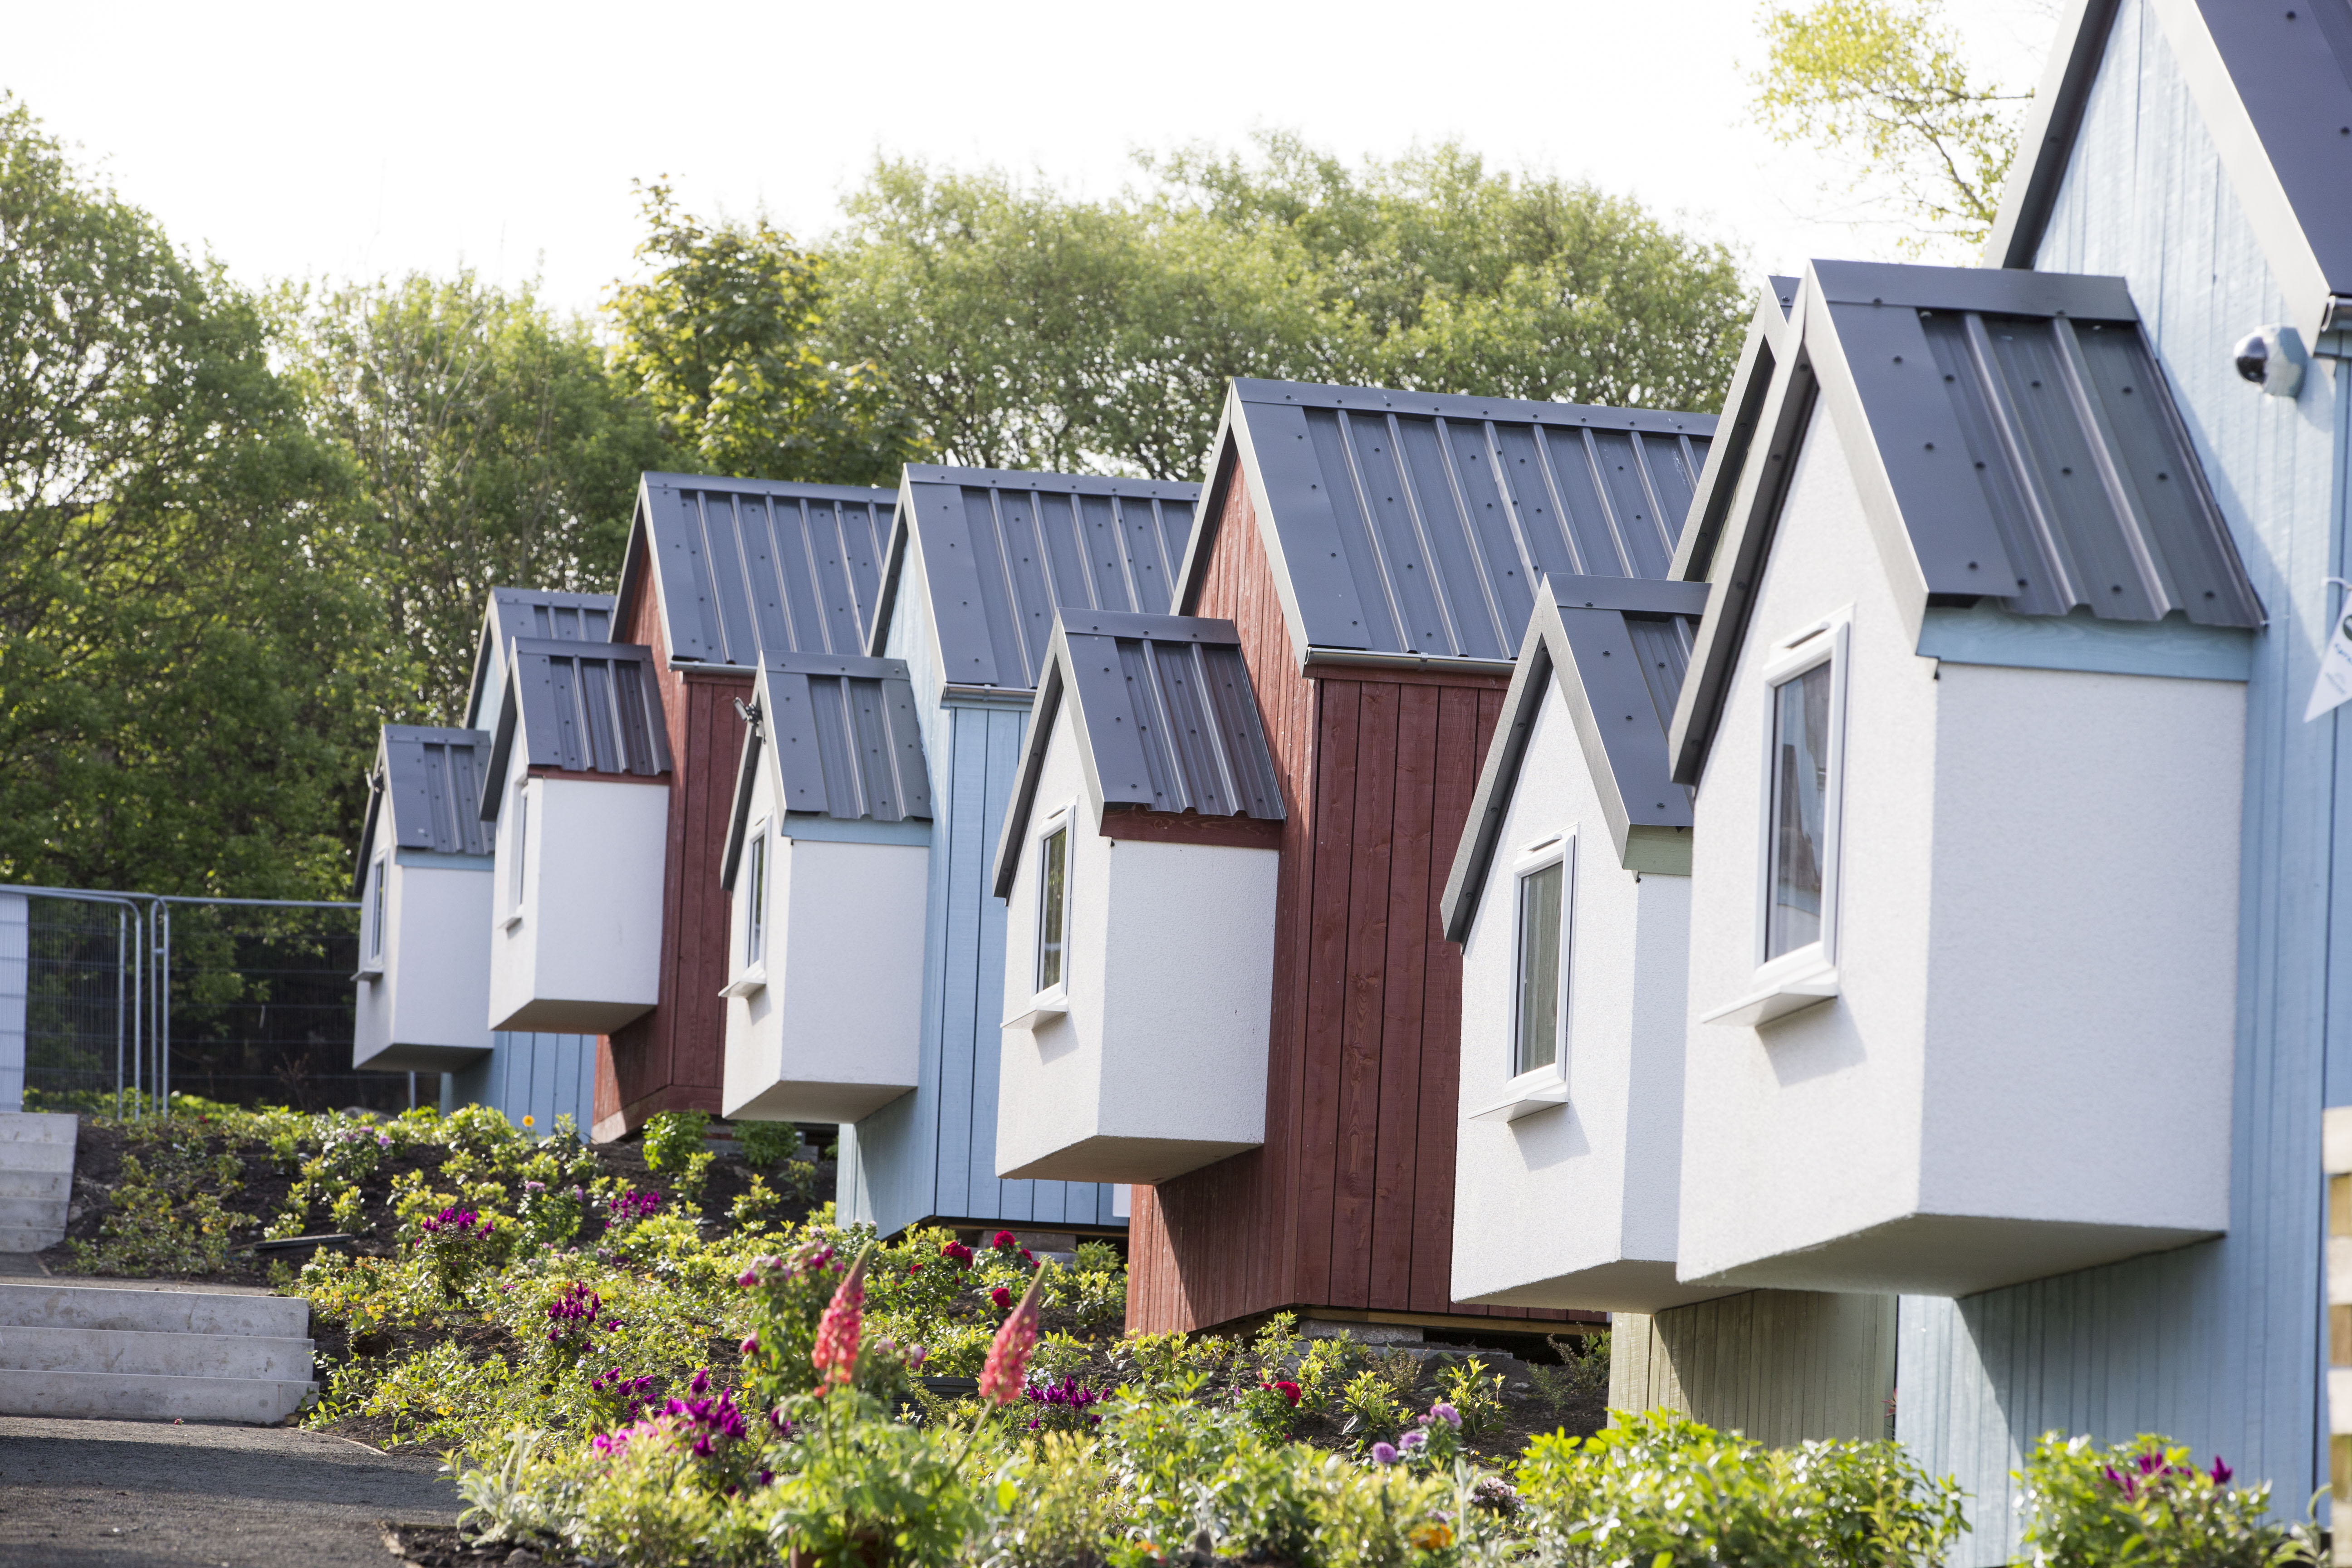 The low cost modular homes that make up the  Social Bite Village in Edinburgh were  designed and constructed by Carbon Dynamics
Picture: Jeff Holmes